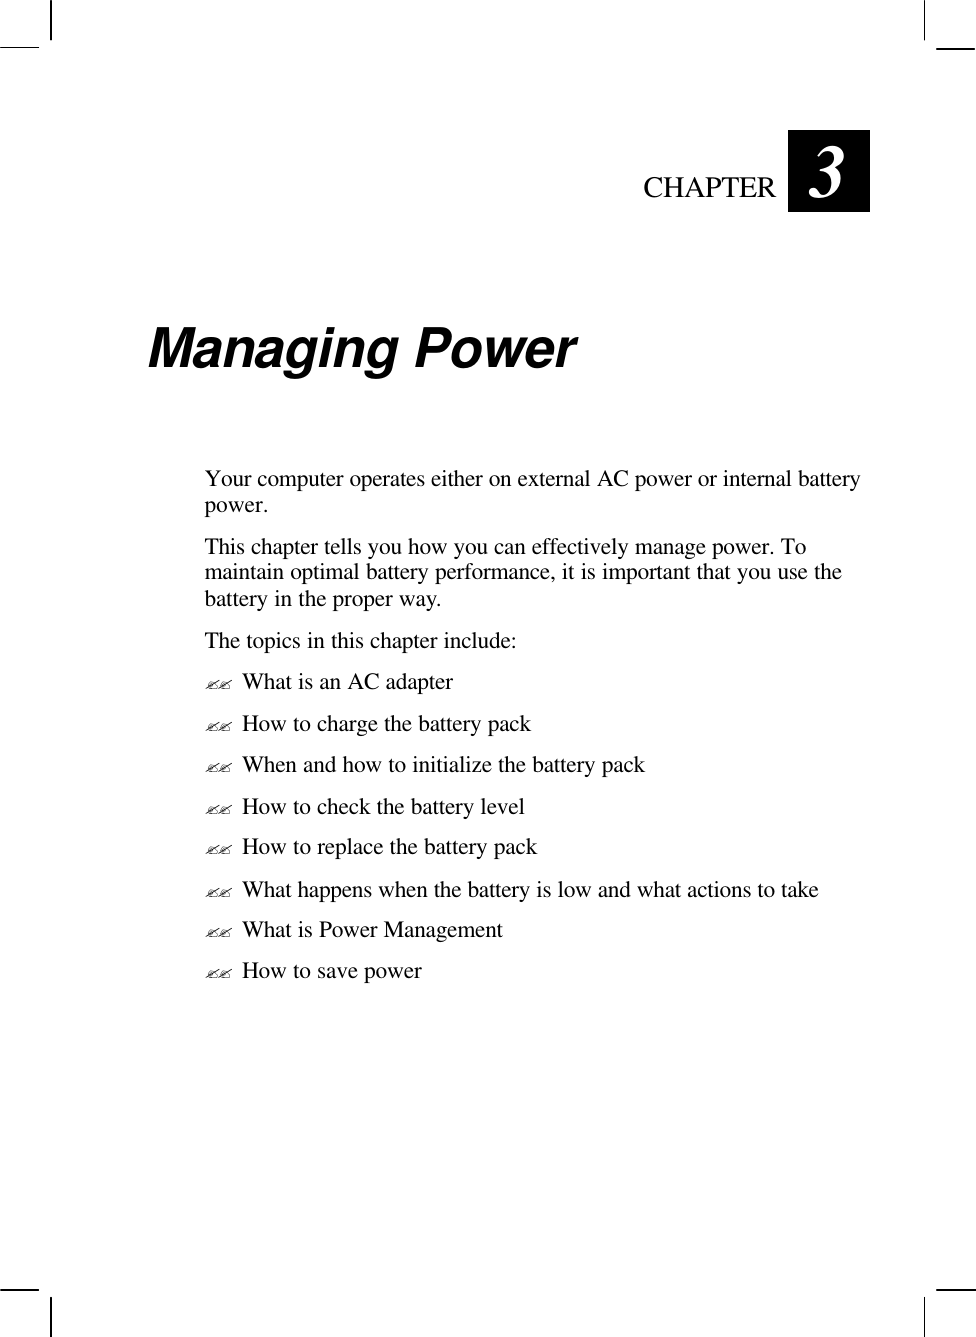   CHAPTER 3 Managing Power Your computer operates either on external AC power or internal battery power. This chapter tells you how you can effectively manage power. To maintain optimal battery performance, it is important that you use the battery in the proper way. The topics in this chapter include: ?? What is an AC adapter ?? How to charge the battery pack ?? When and how to initialize the battery pack ?? How to check the battery level ?? How to replace the battery pack ?? What happens when the battery is low and what actions to take ?? What is Power Management ?? How to save power 